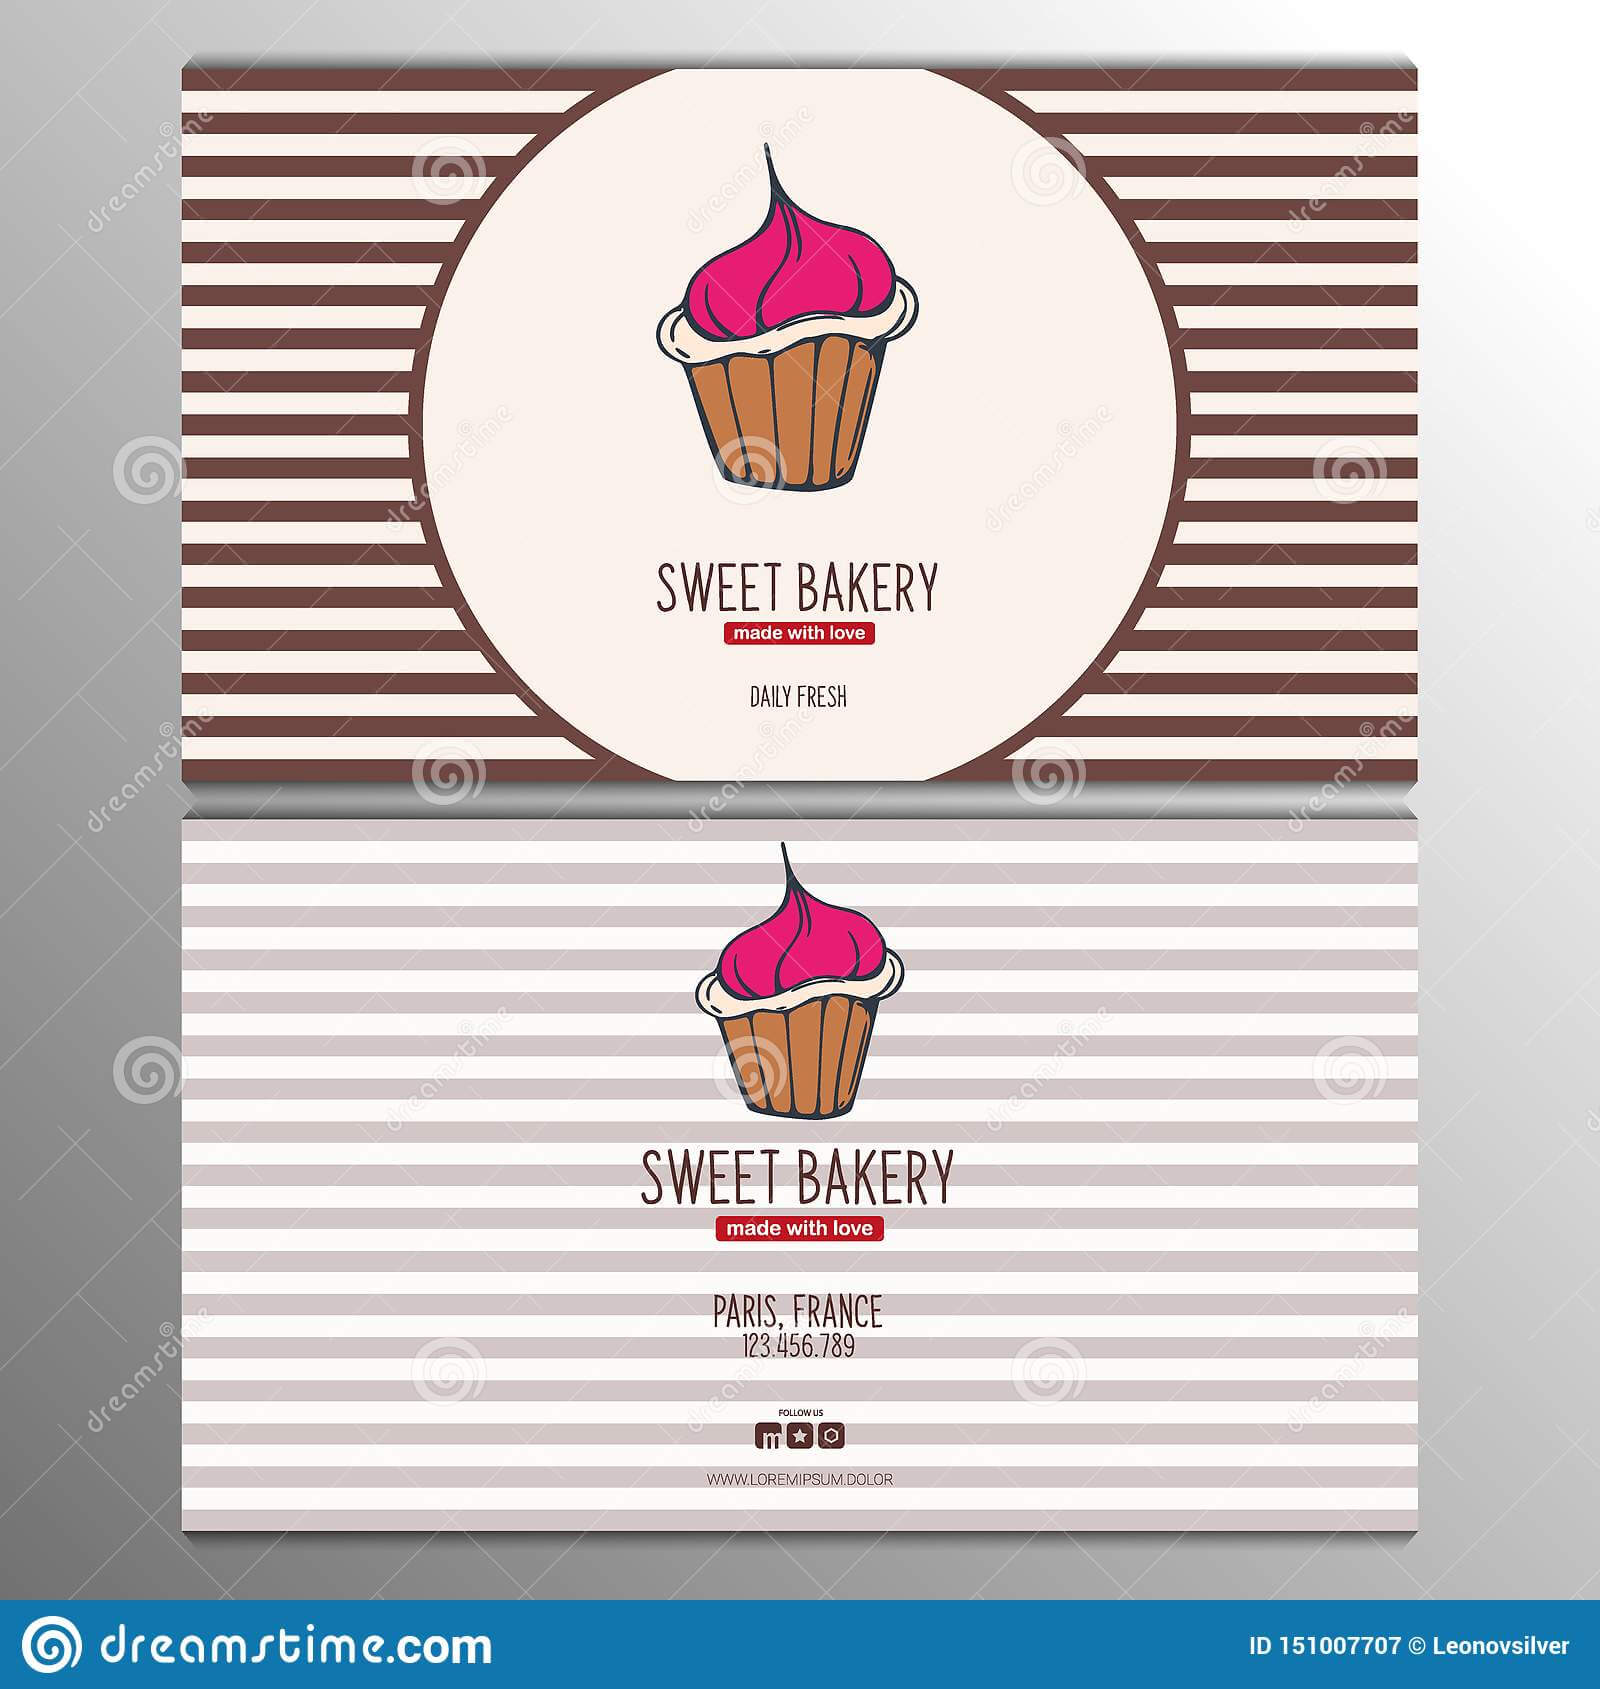 Cupcake Or Cake Business Card Template For Bakery Or Pastry Regarding Cake Business Cards Templates Free